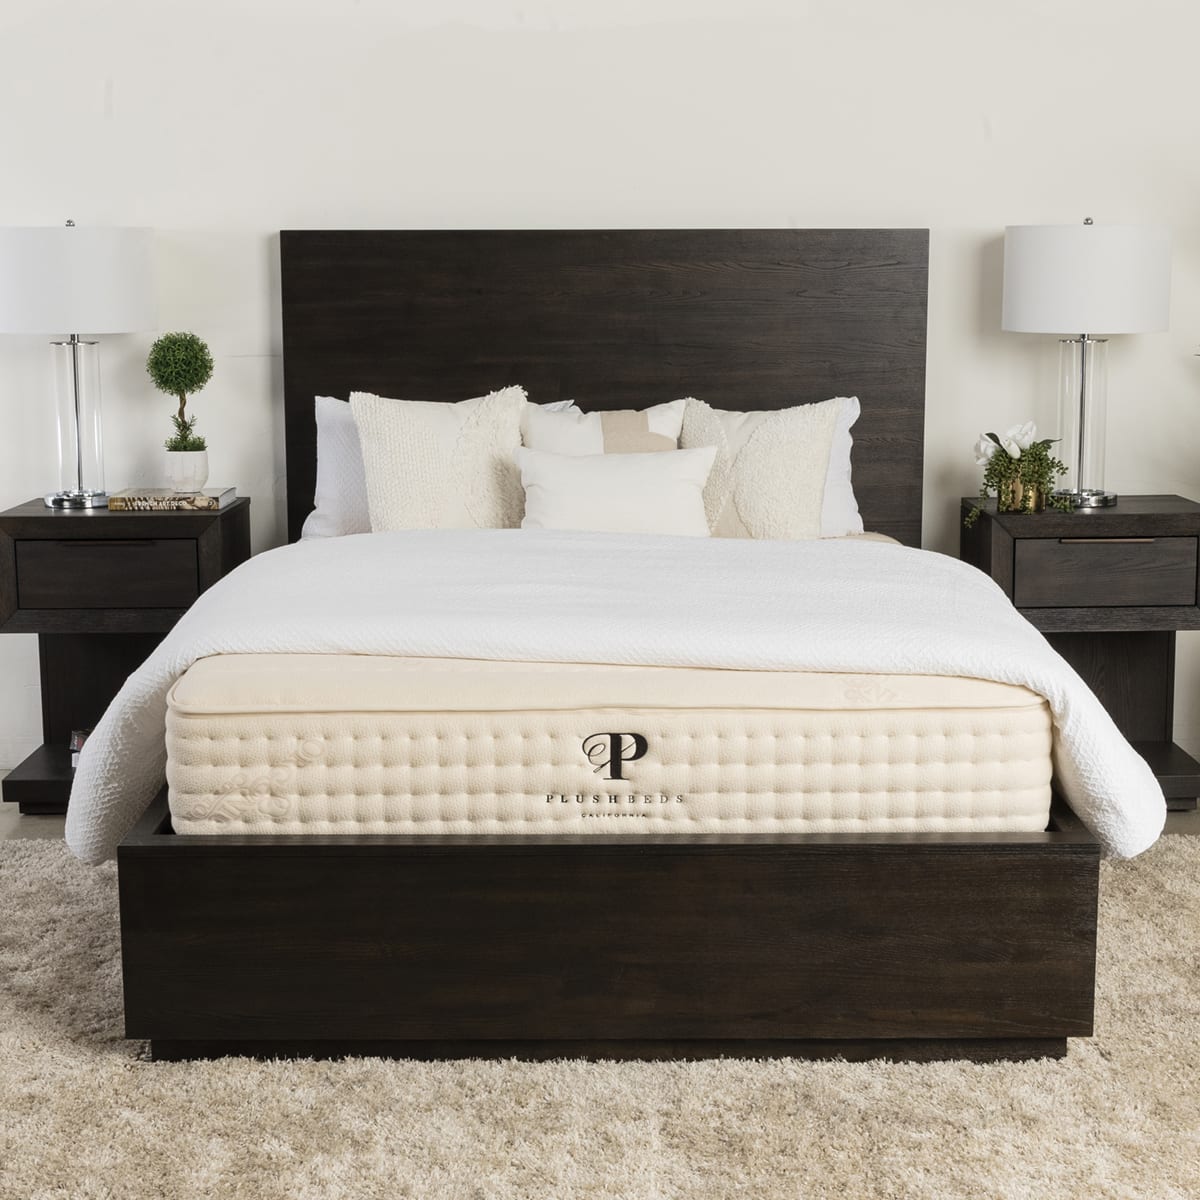 Can A Serta Adjustable Base Be Used On A Tempur Pedic King Size Bed